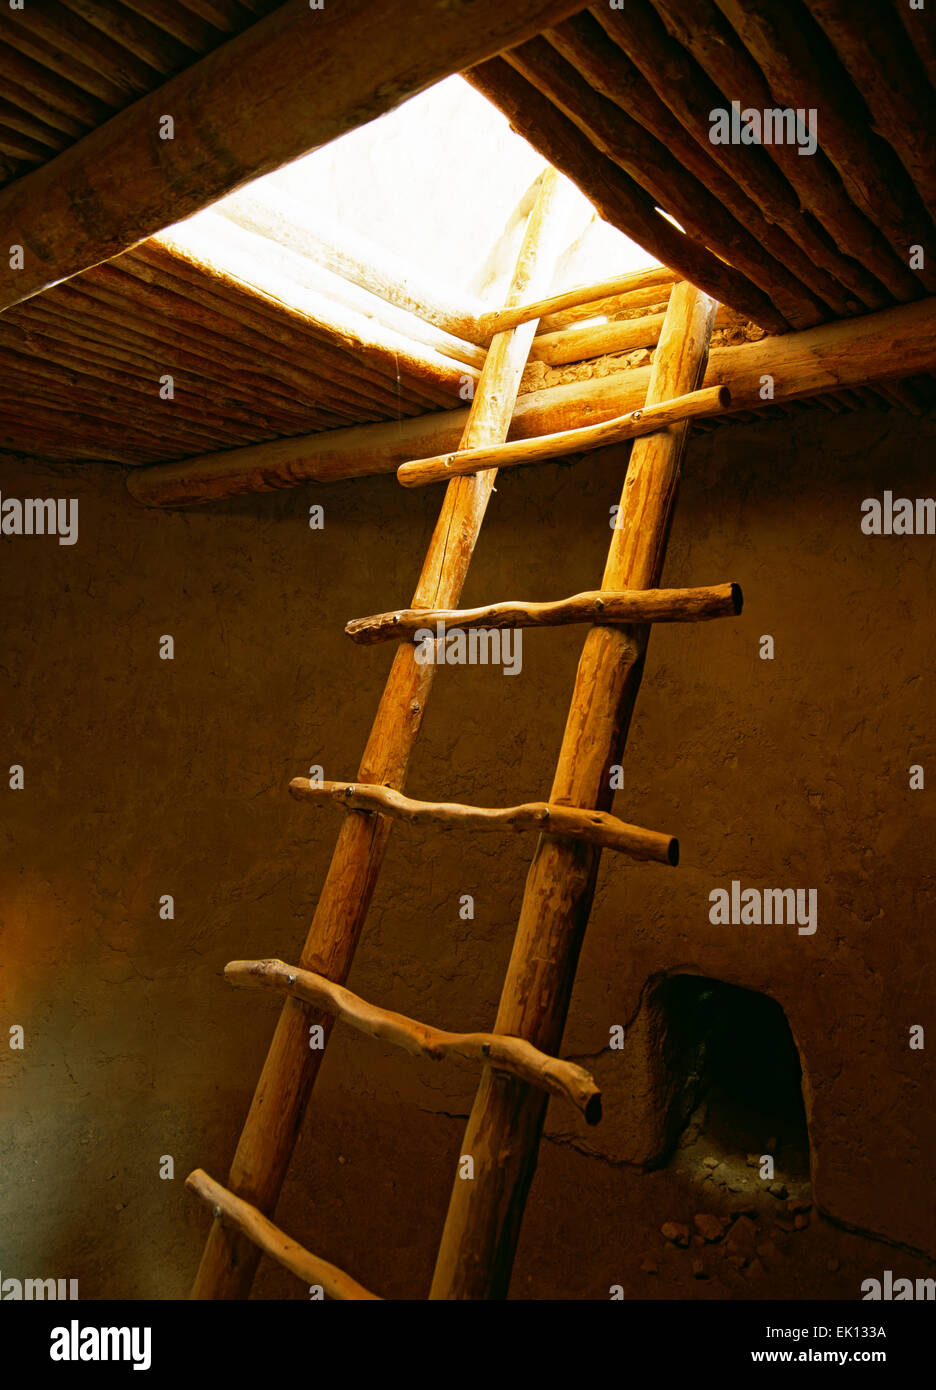 Ladder, reconstructed kiva, Ceremonial Cave, Bandelier National Monument, New Mexico USA Stock Photo